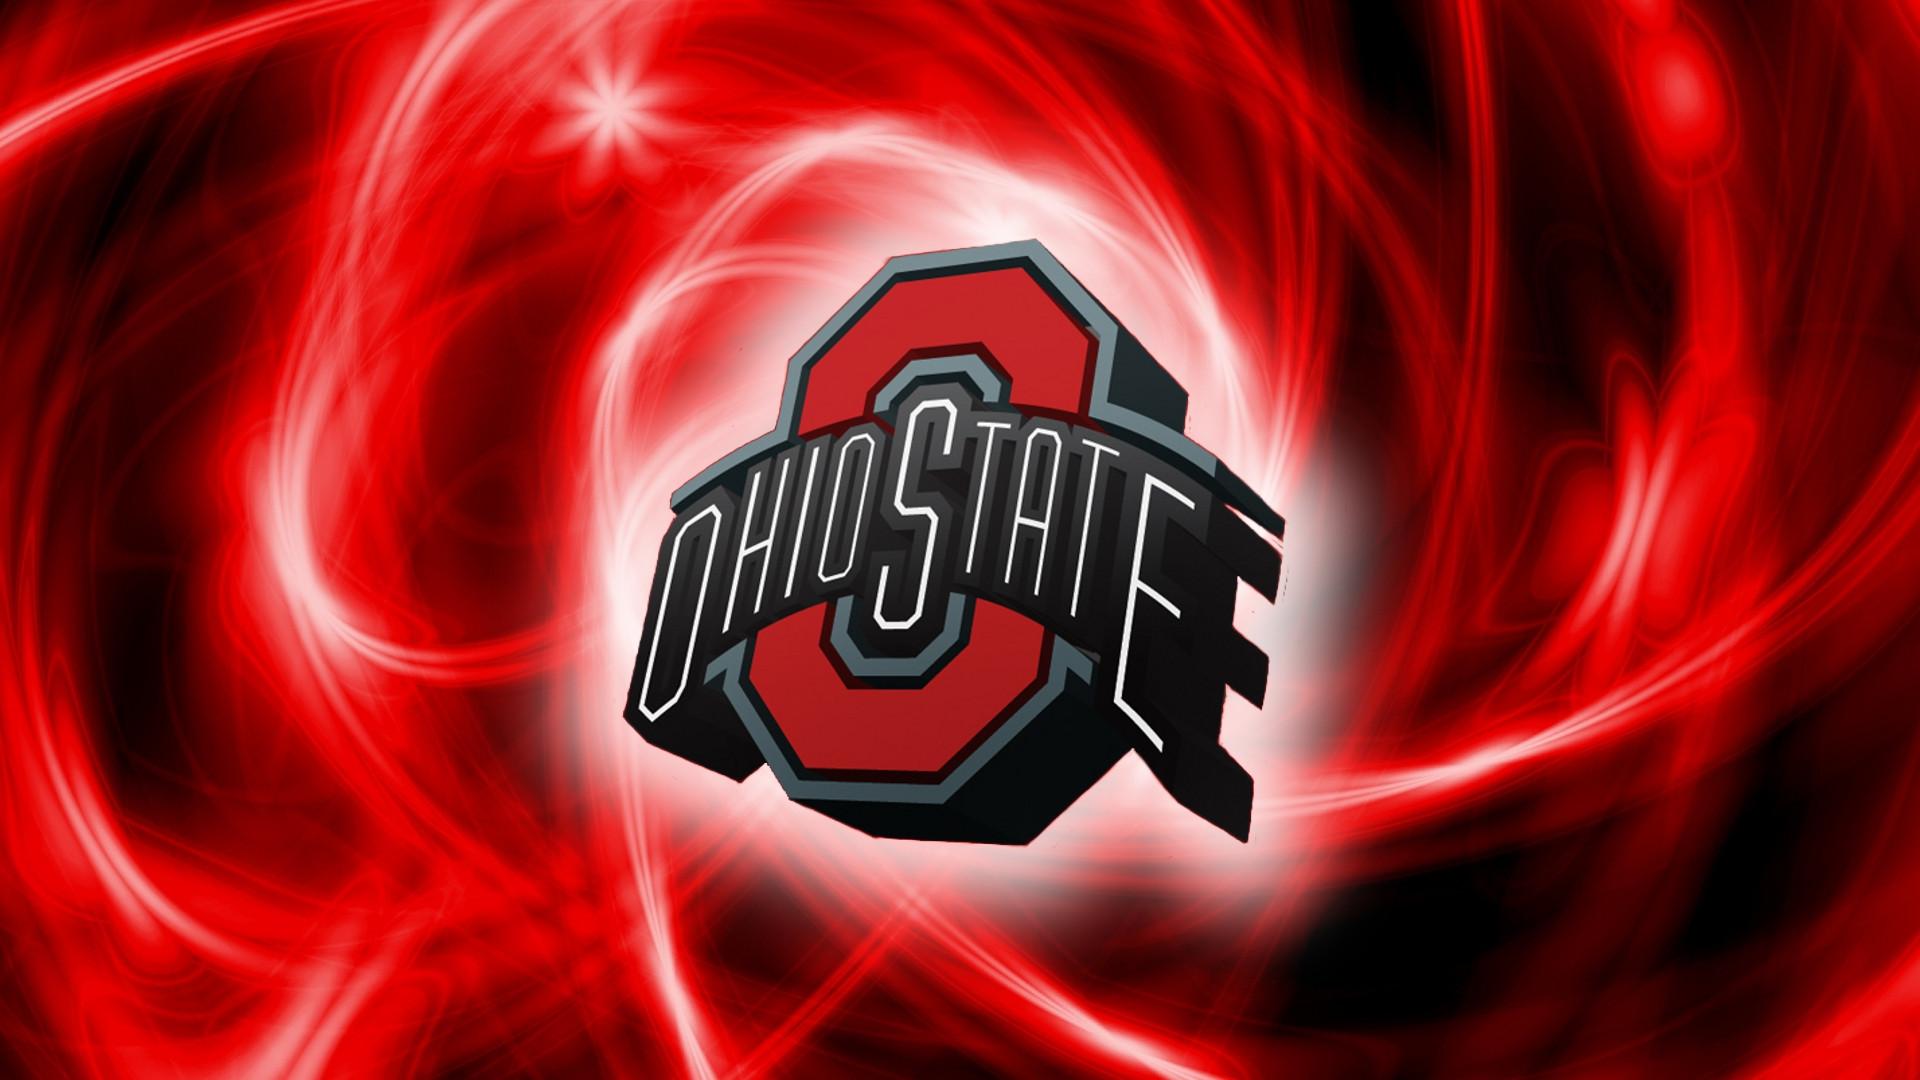 Ohio State Buckeyes Football Backgrounds Download | Wallpapers ...